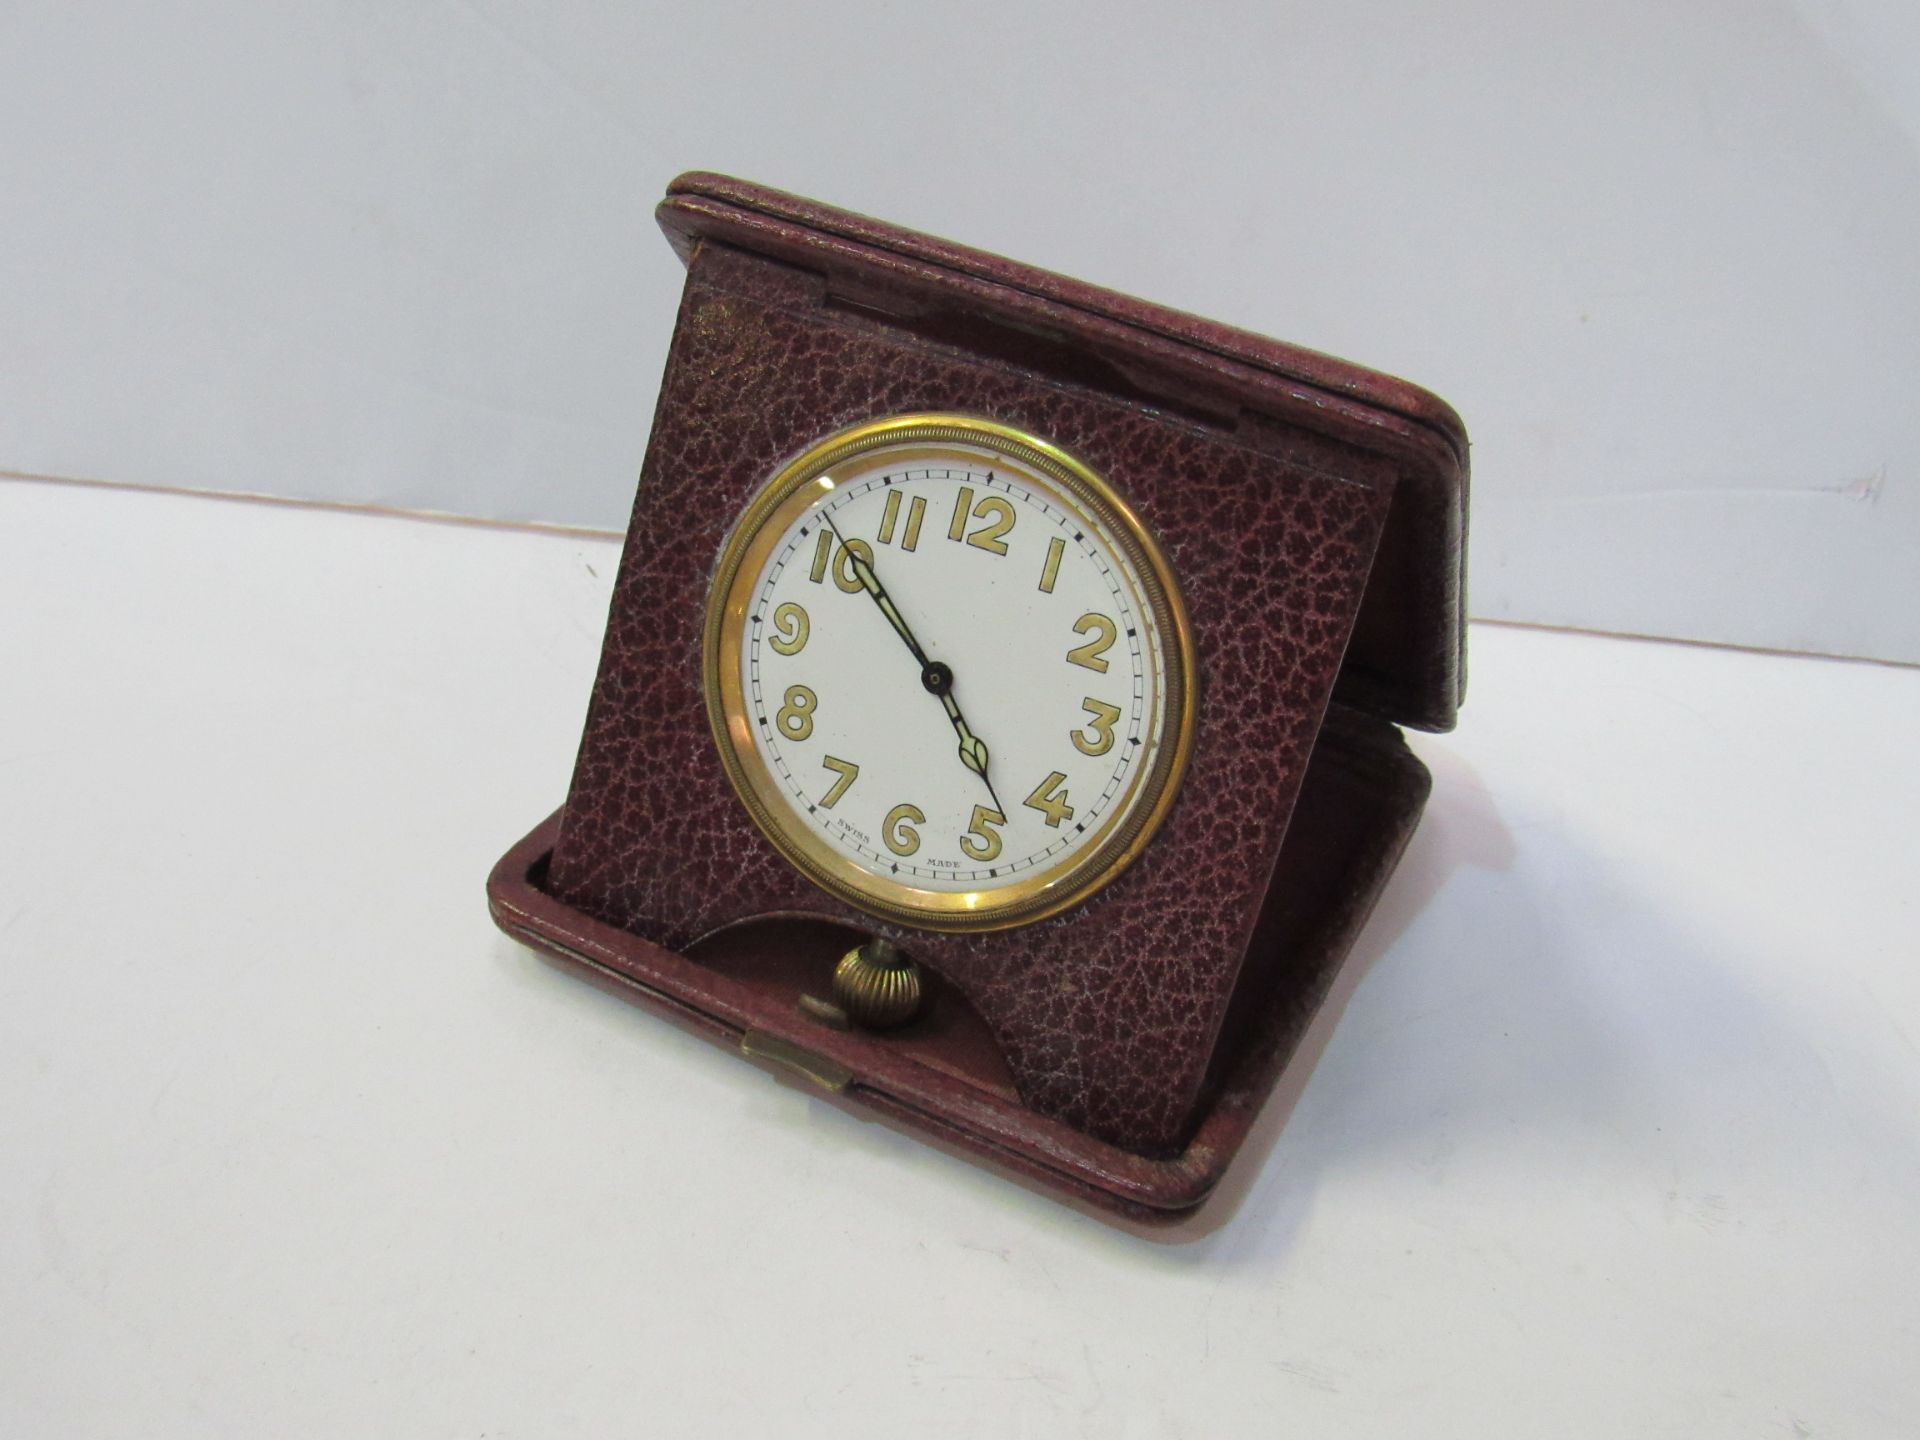 Vintage travelling clock in red leather case.